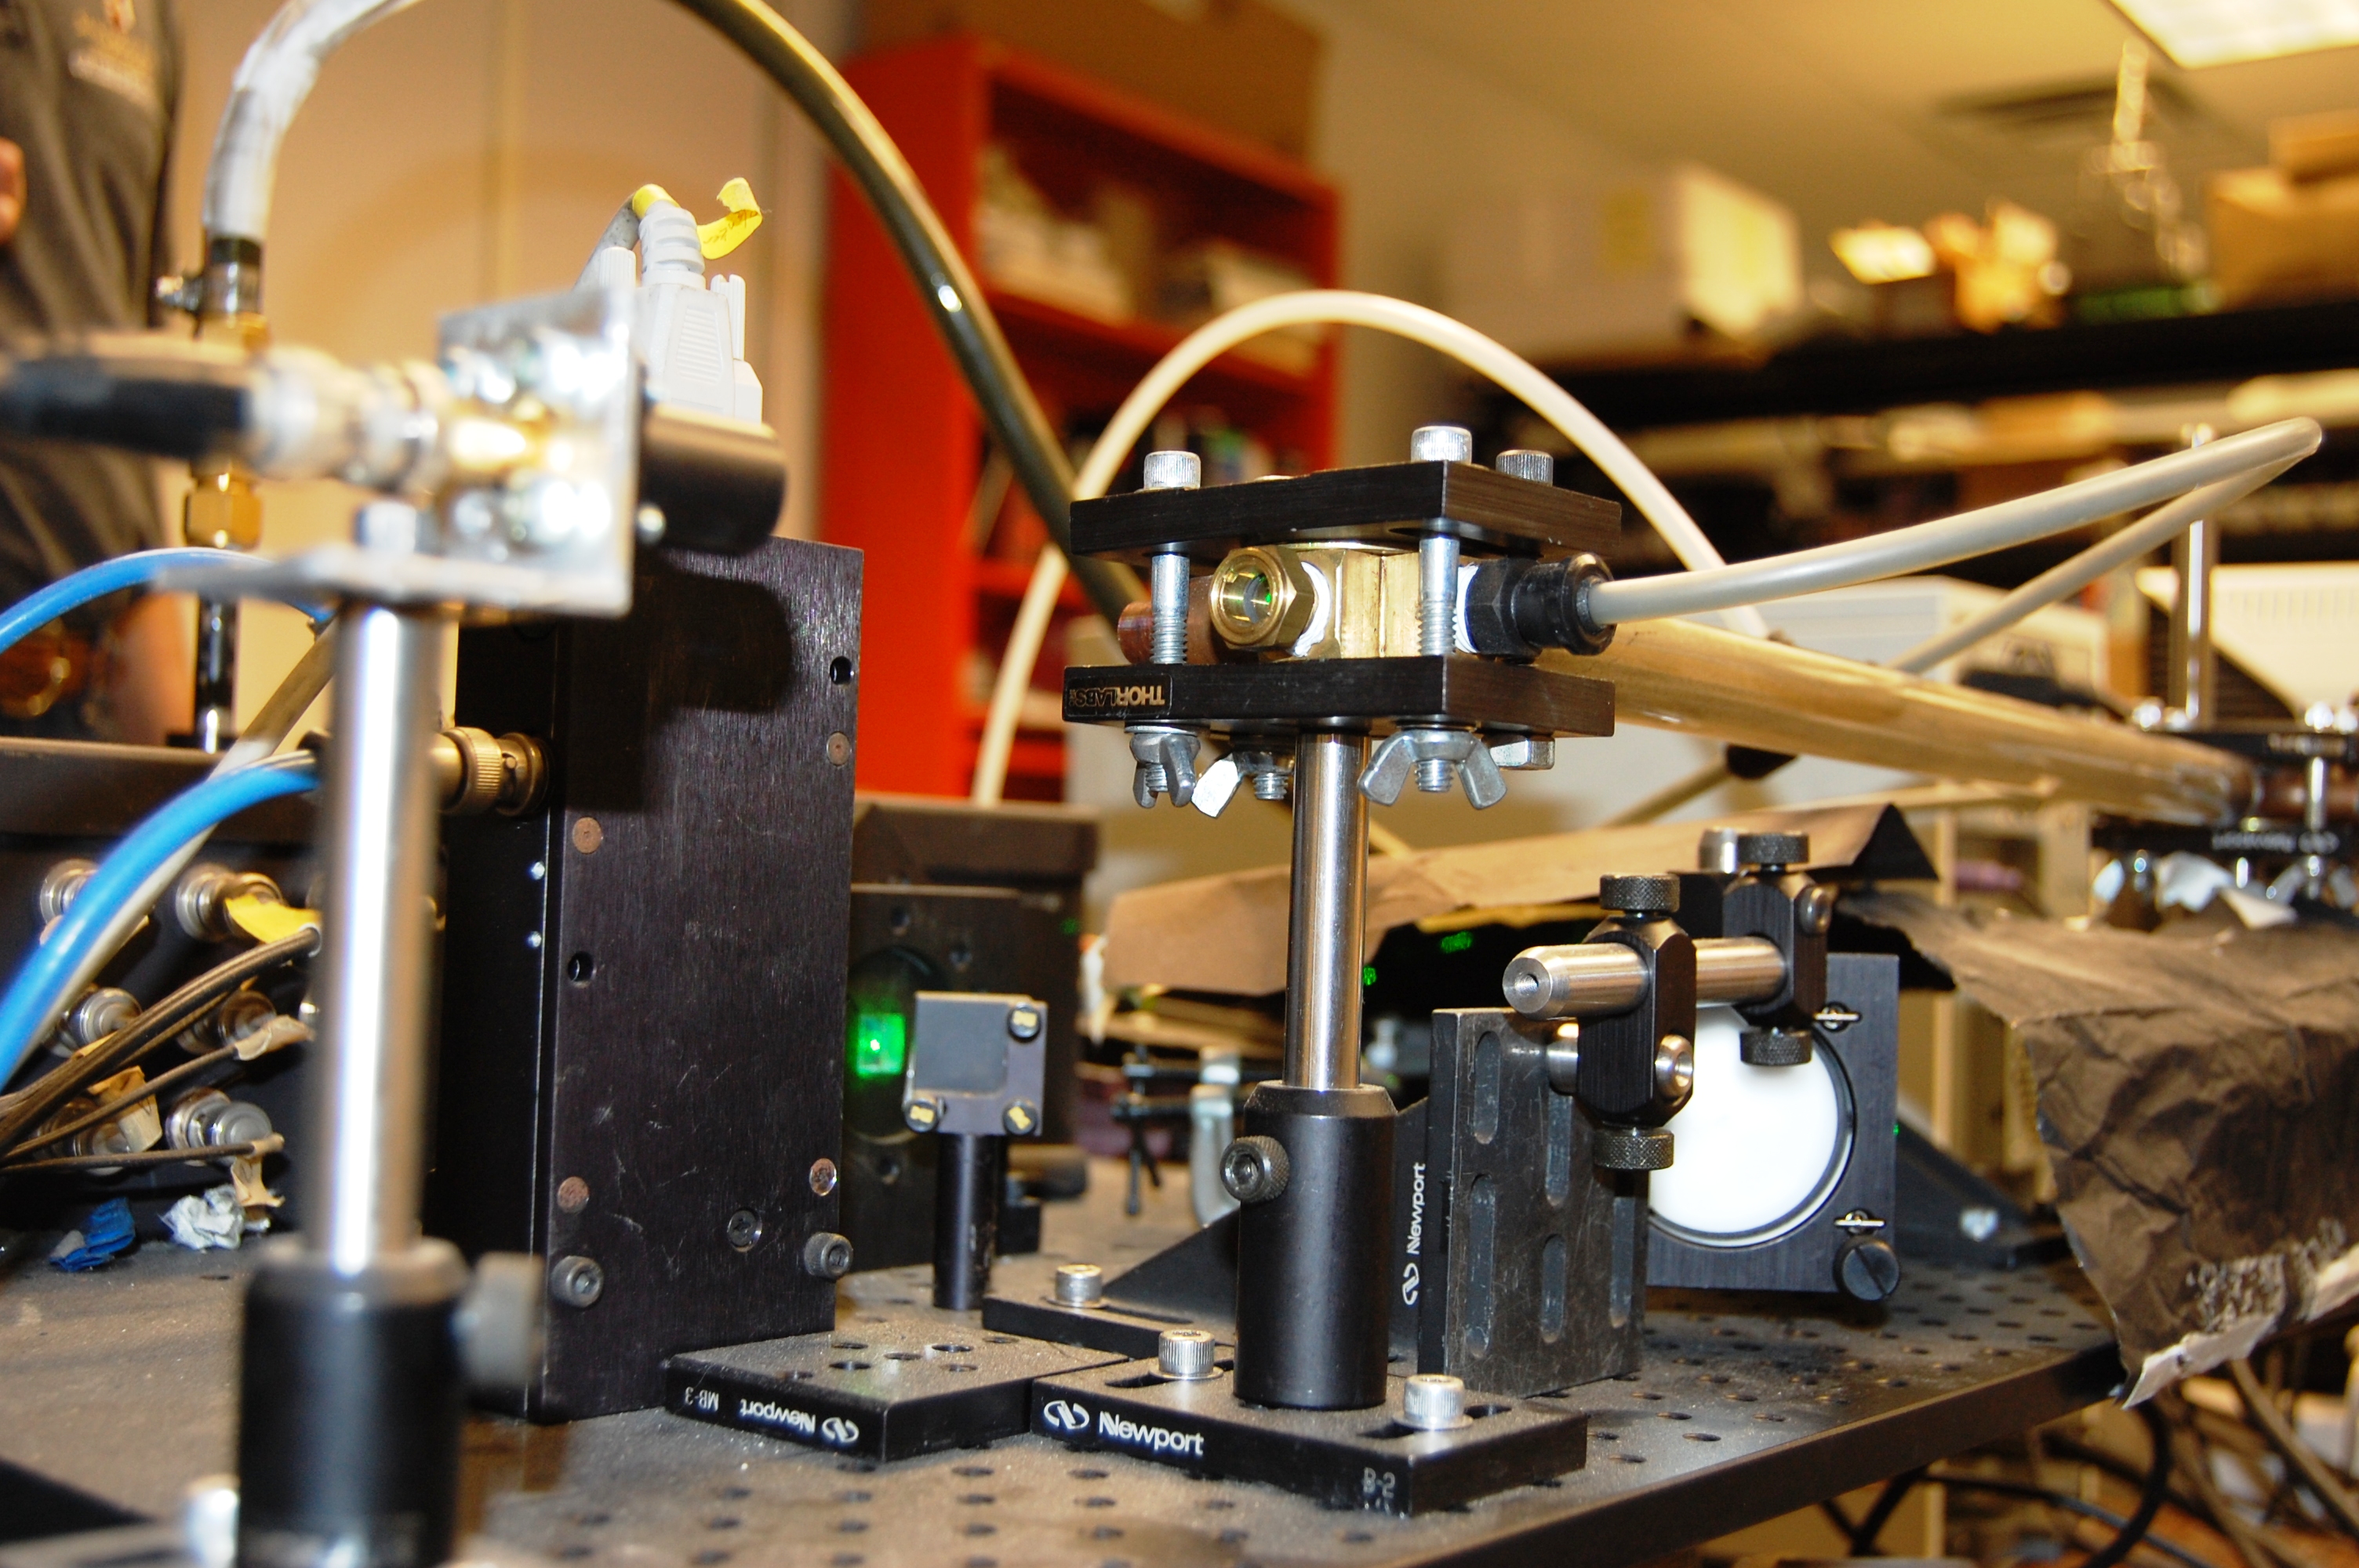 A laser is used in the particle generation process to create carbon nano particles.